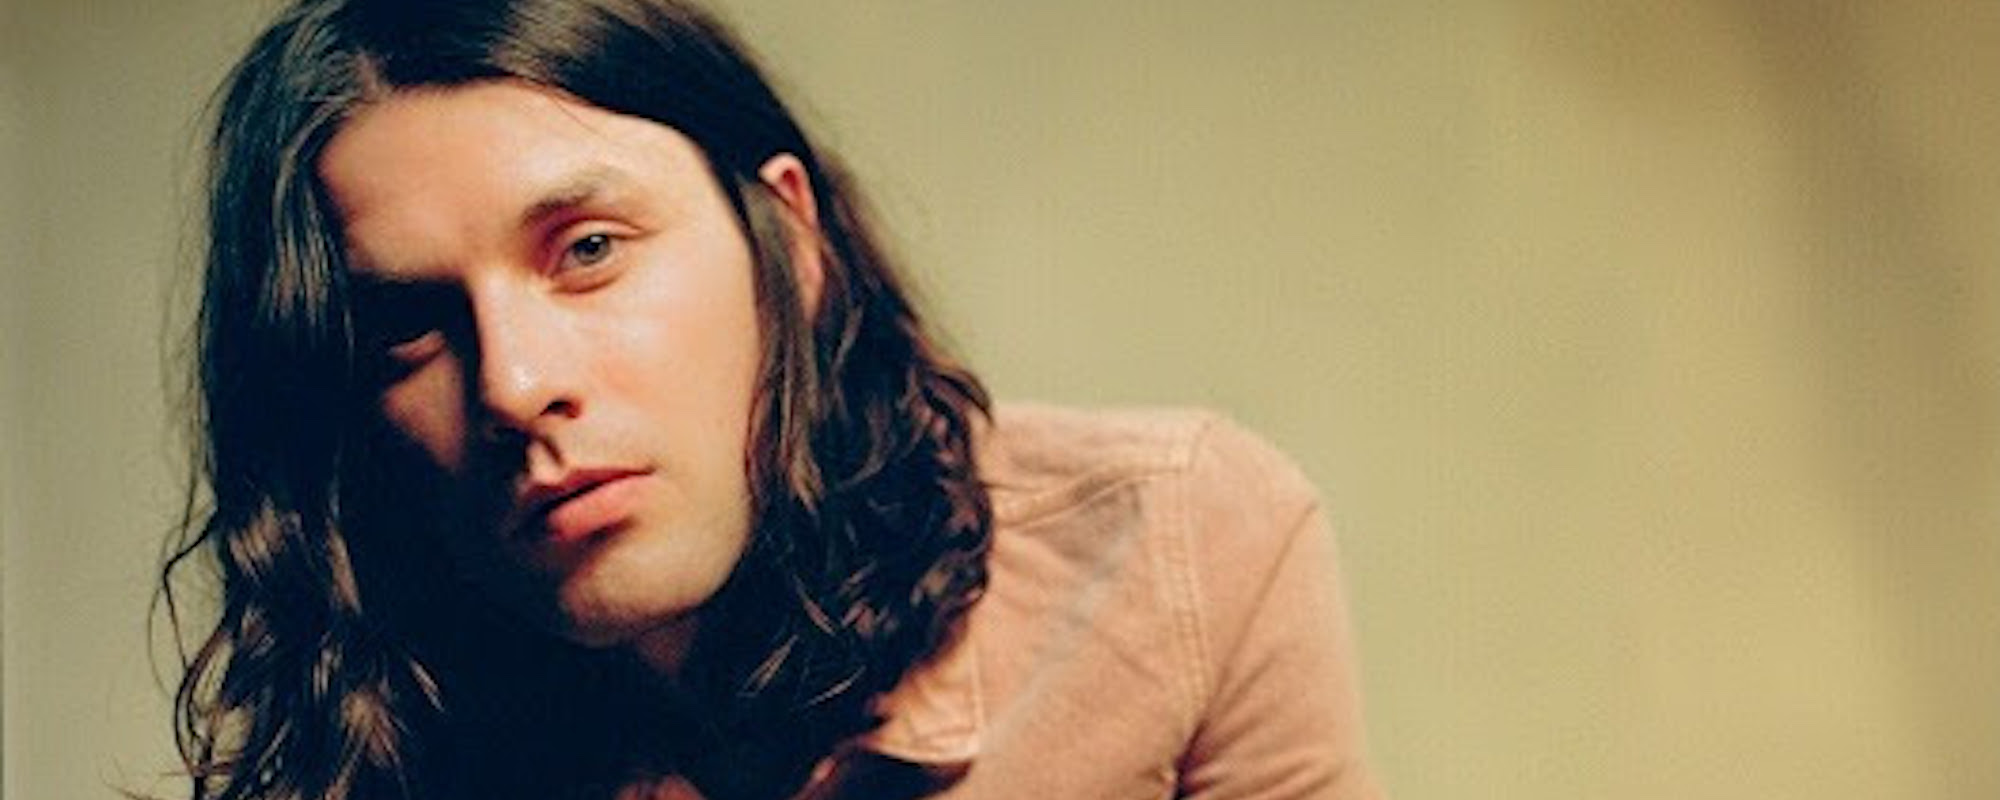 James Bay Returns with Impassioned New Single “Goodbye Never Felt So Bad”